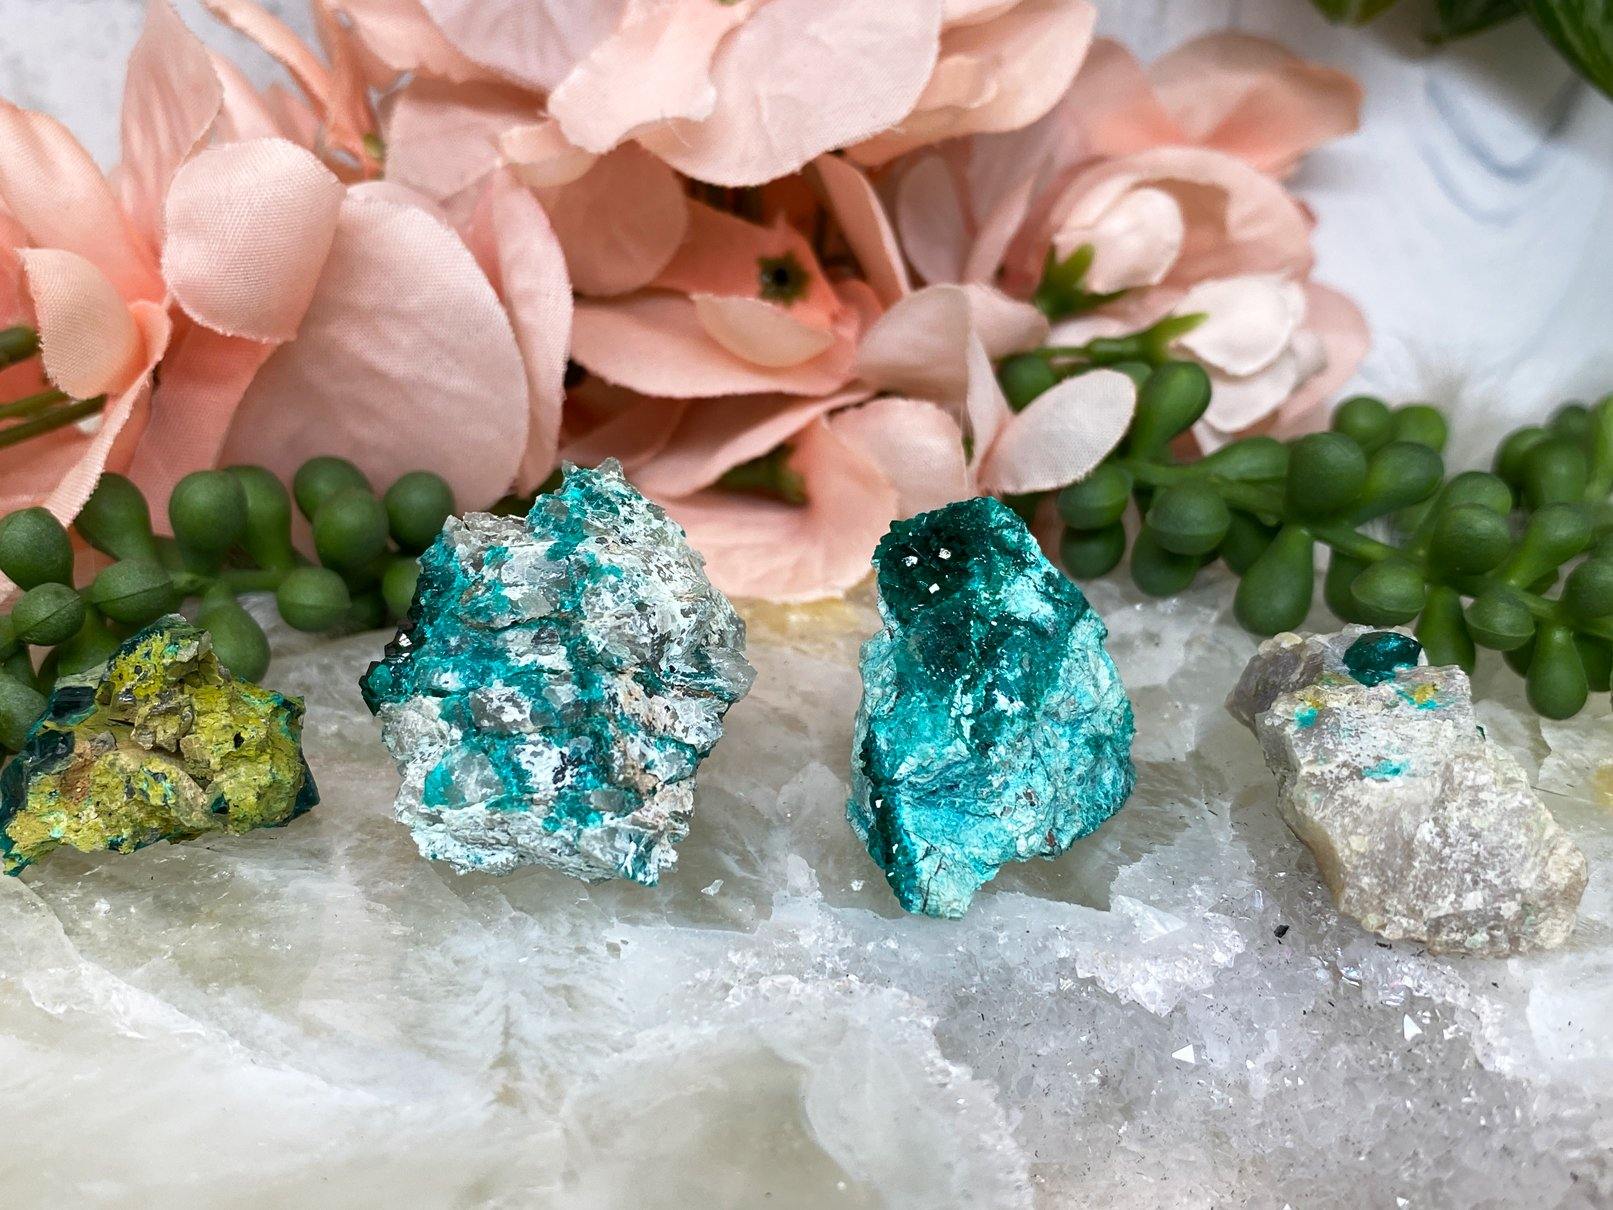 Raw-Nambian-Teal-Dioptase-Crystal-Specimens